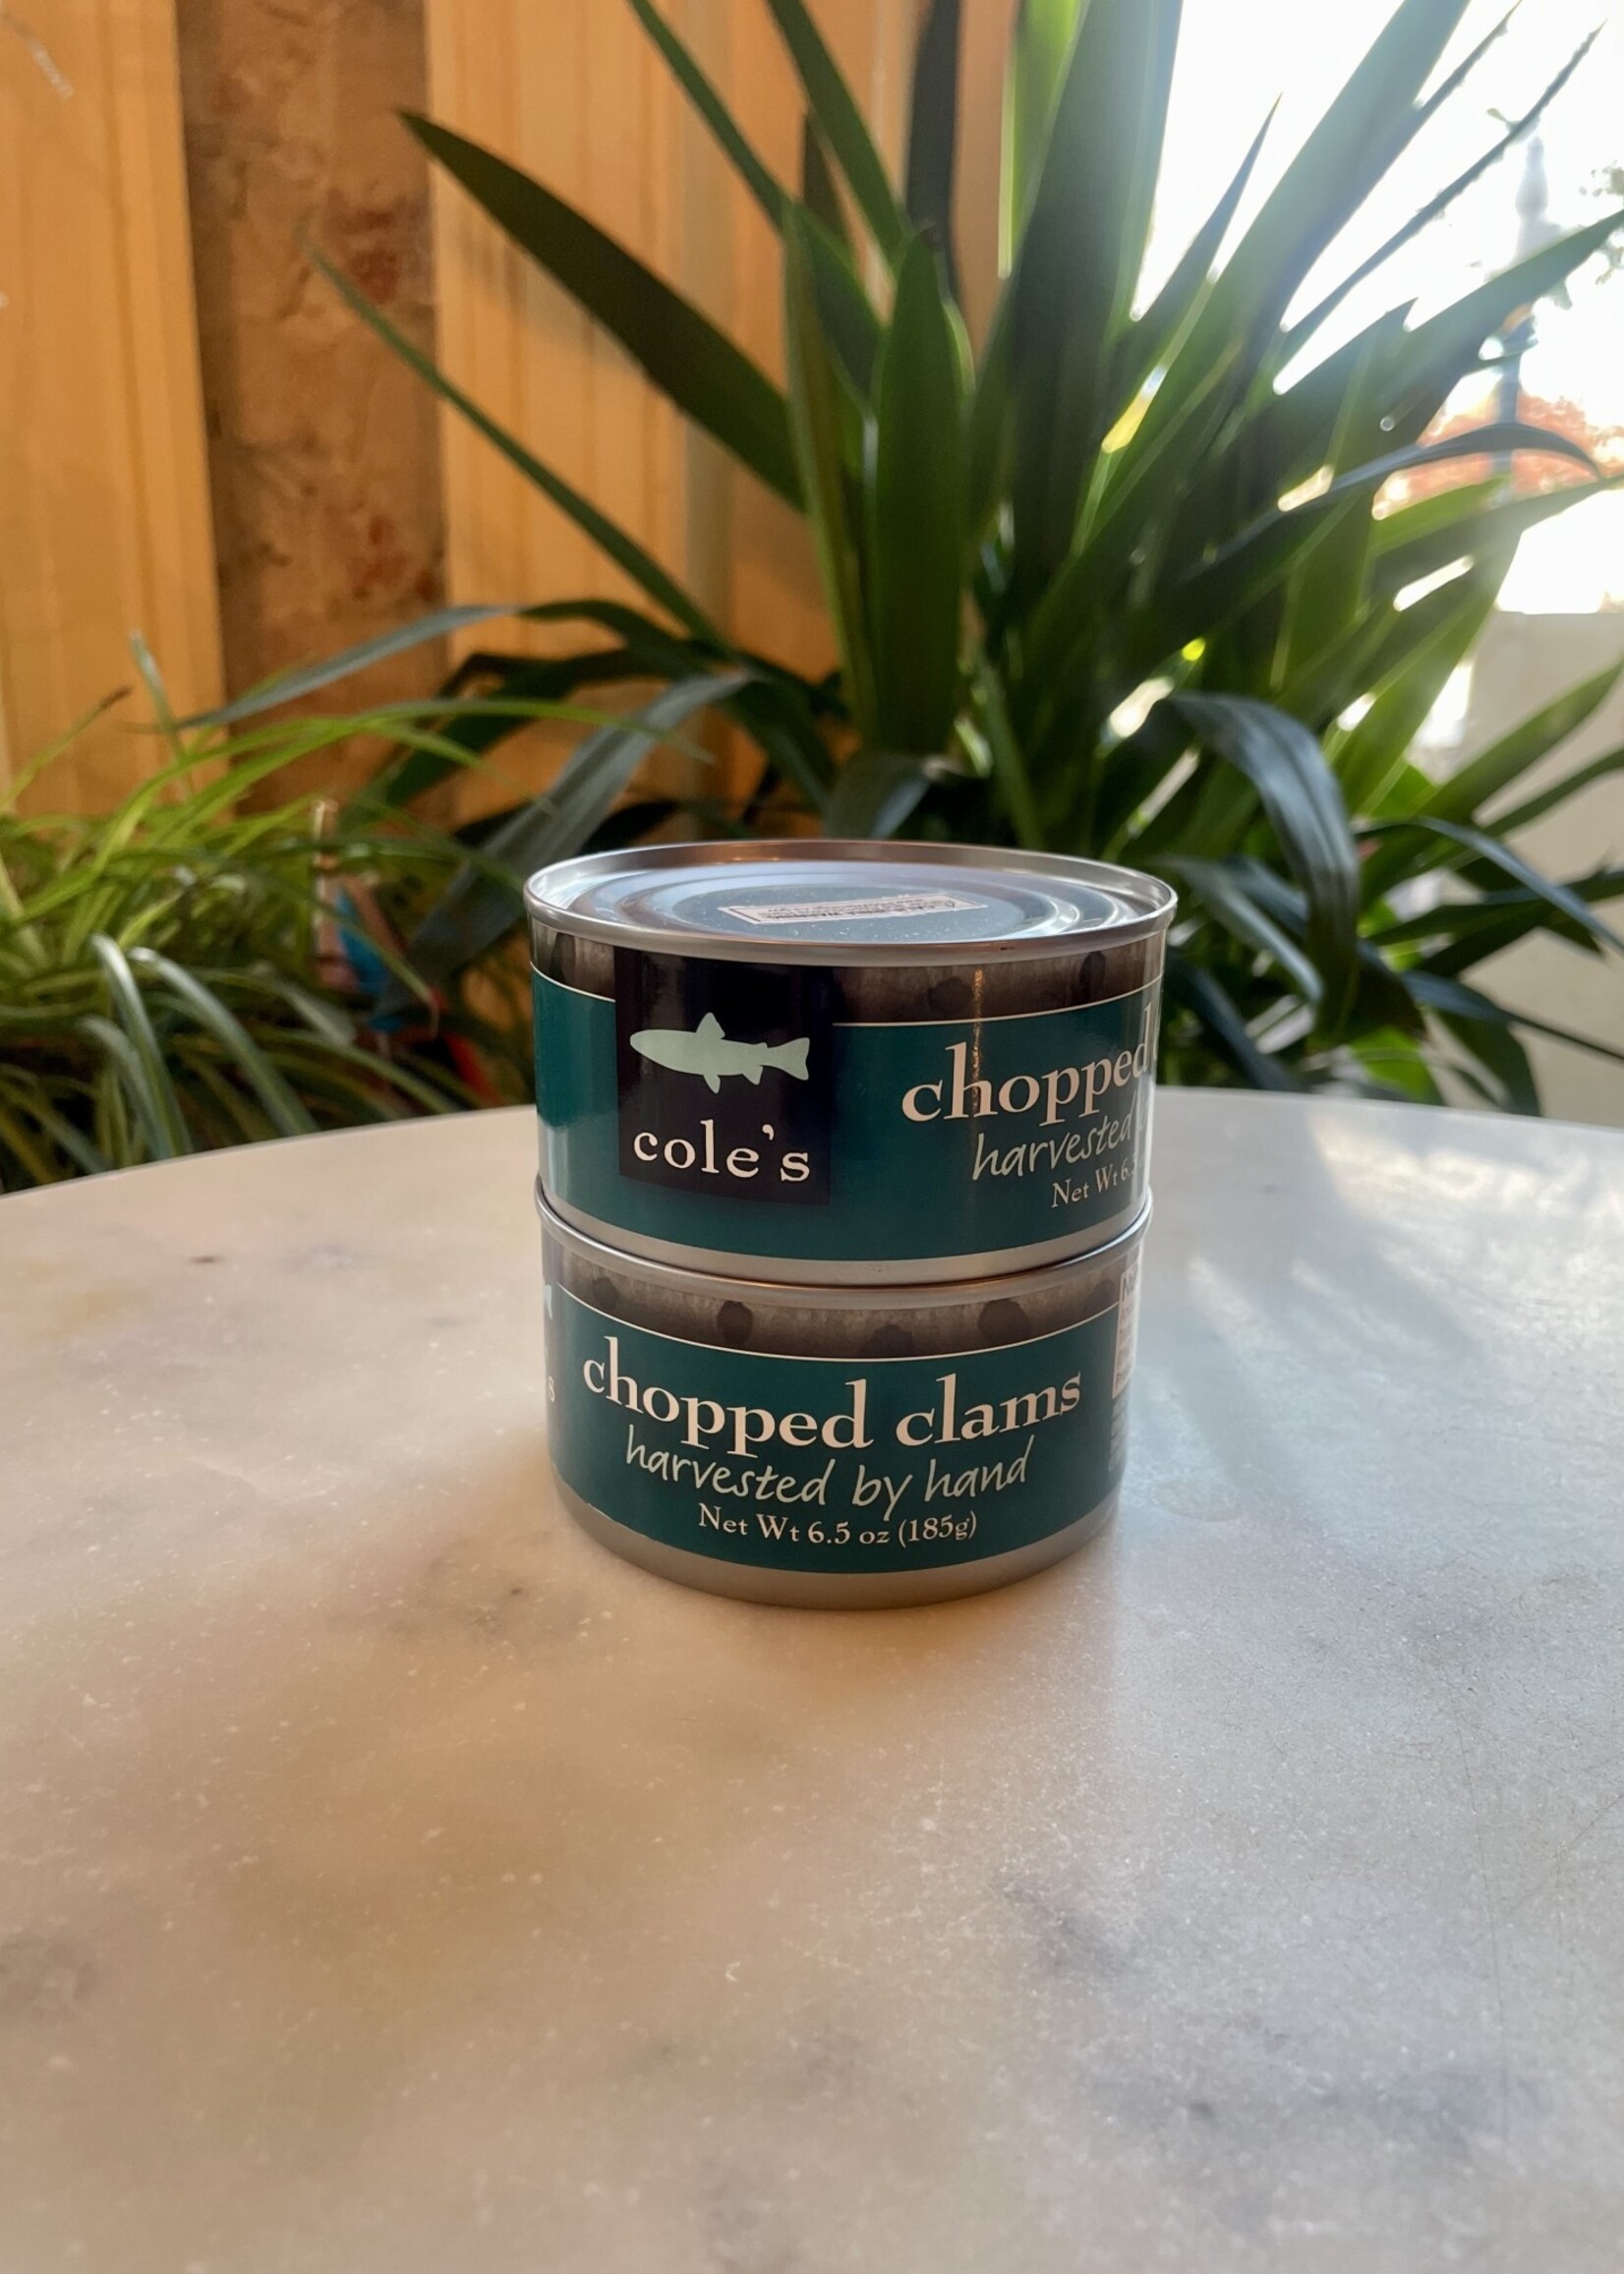 Cole’s Fine Food Chopped Clams Harvested by Hand 6.5oz (185g)